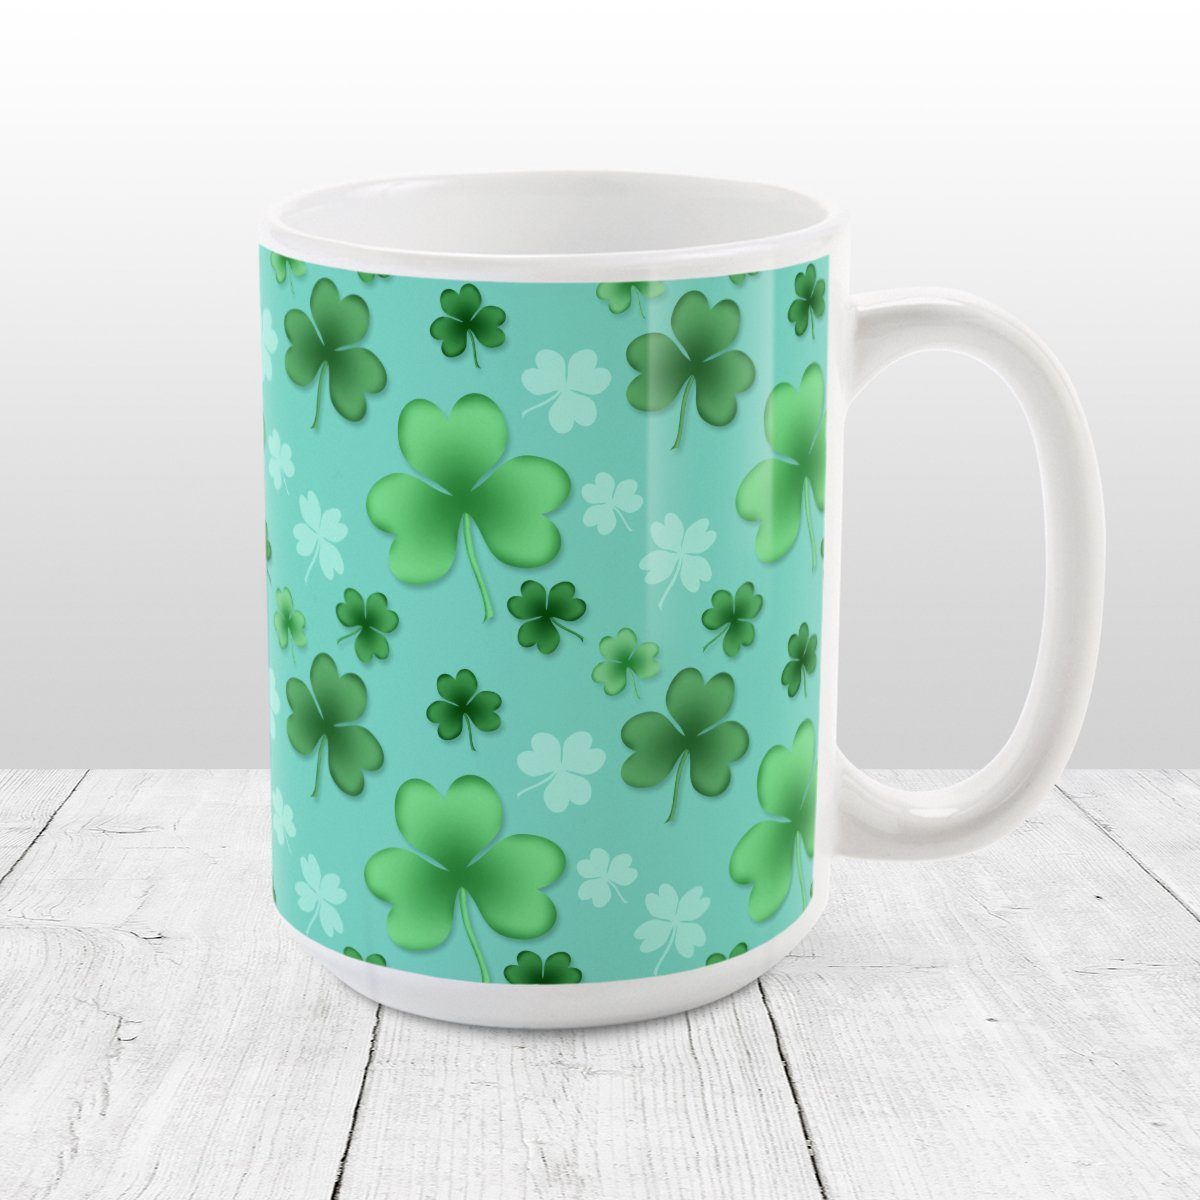 Clover Mug - St Patrick's Day - Lucky Clover Pattern Teal and Green - Clover Mug at Amy's Coffee Mugs. A ceramic coffee mug designed with a lucky green clover pattern with a 4-leaf clover among 3-leaf clovers, in different shades of green, over a teal background that wraps around the mug to the handle.